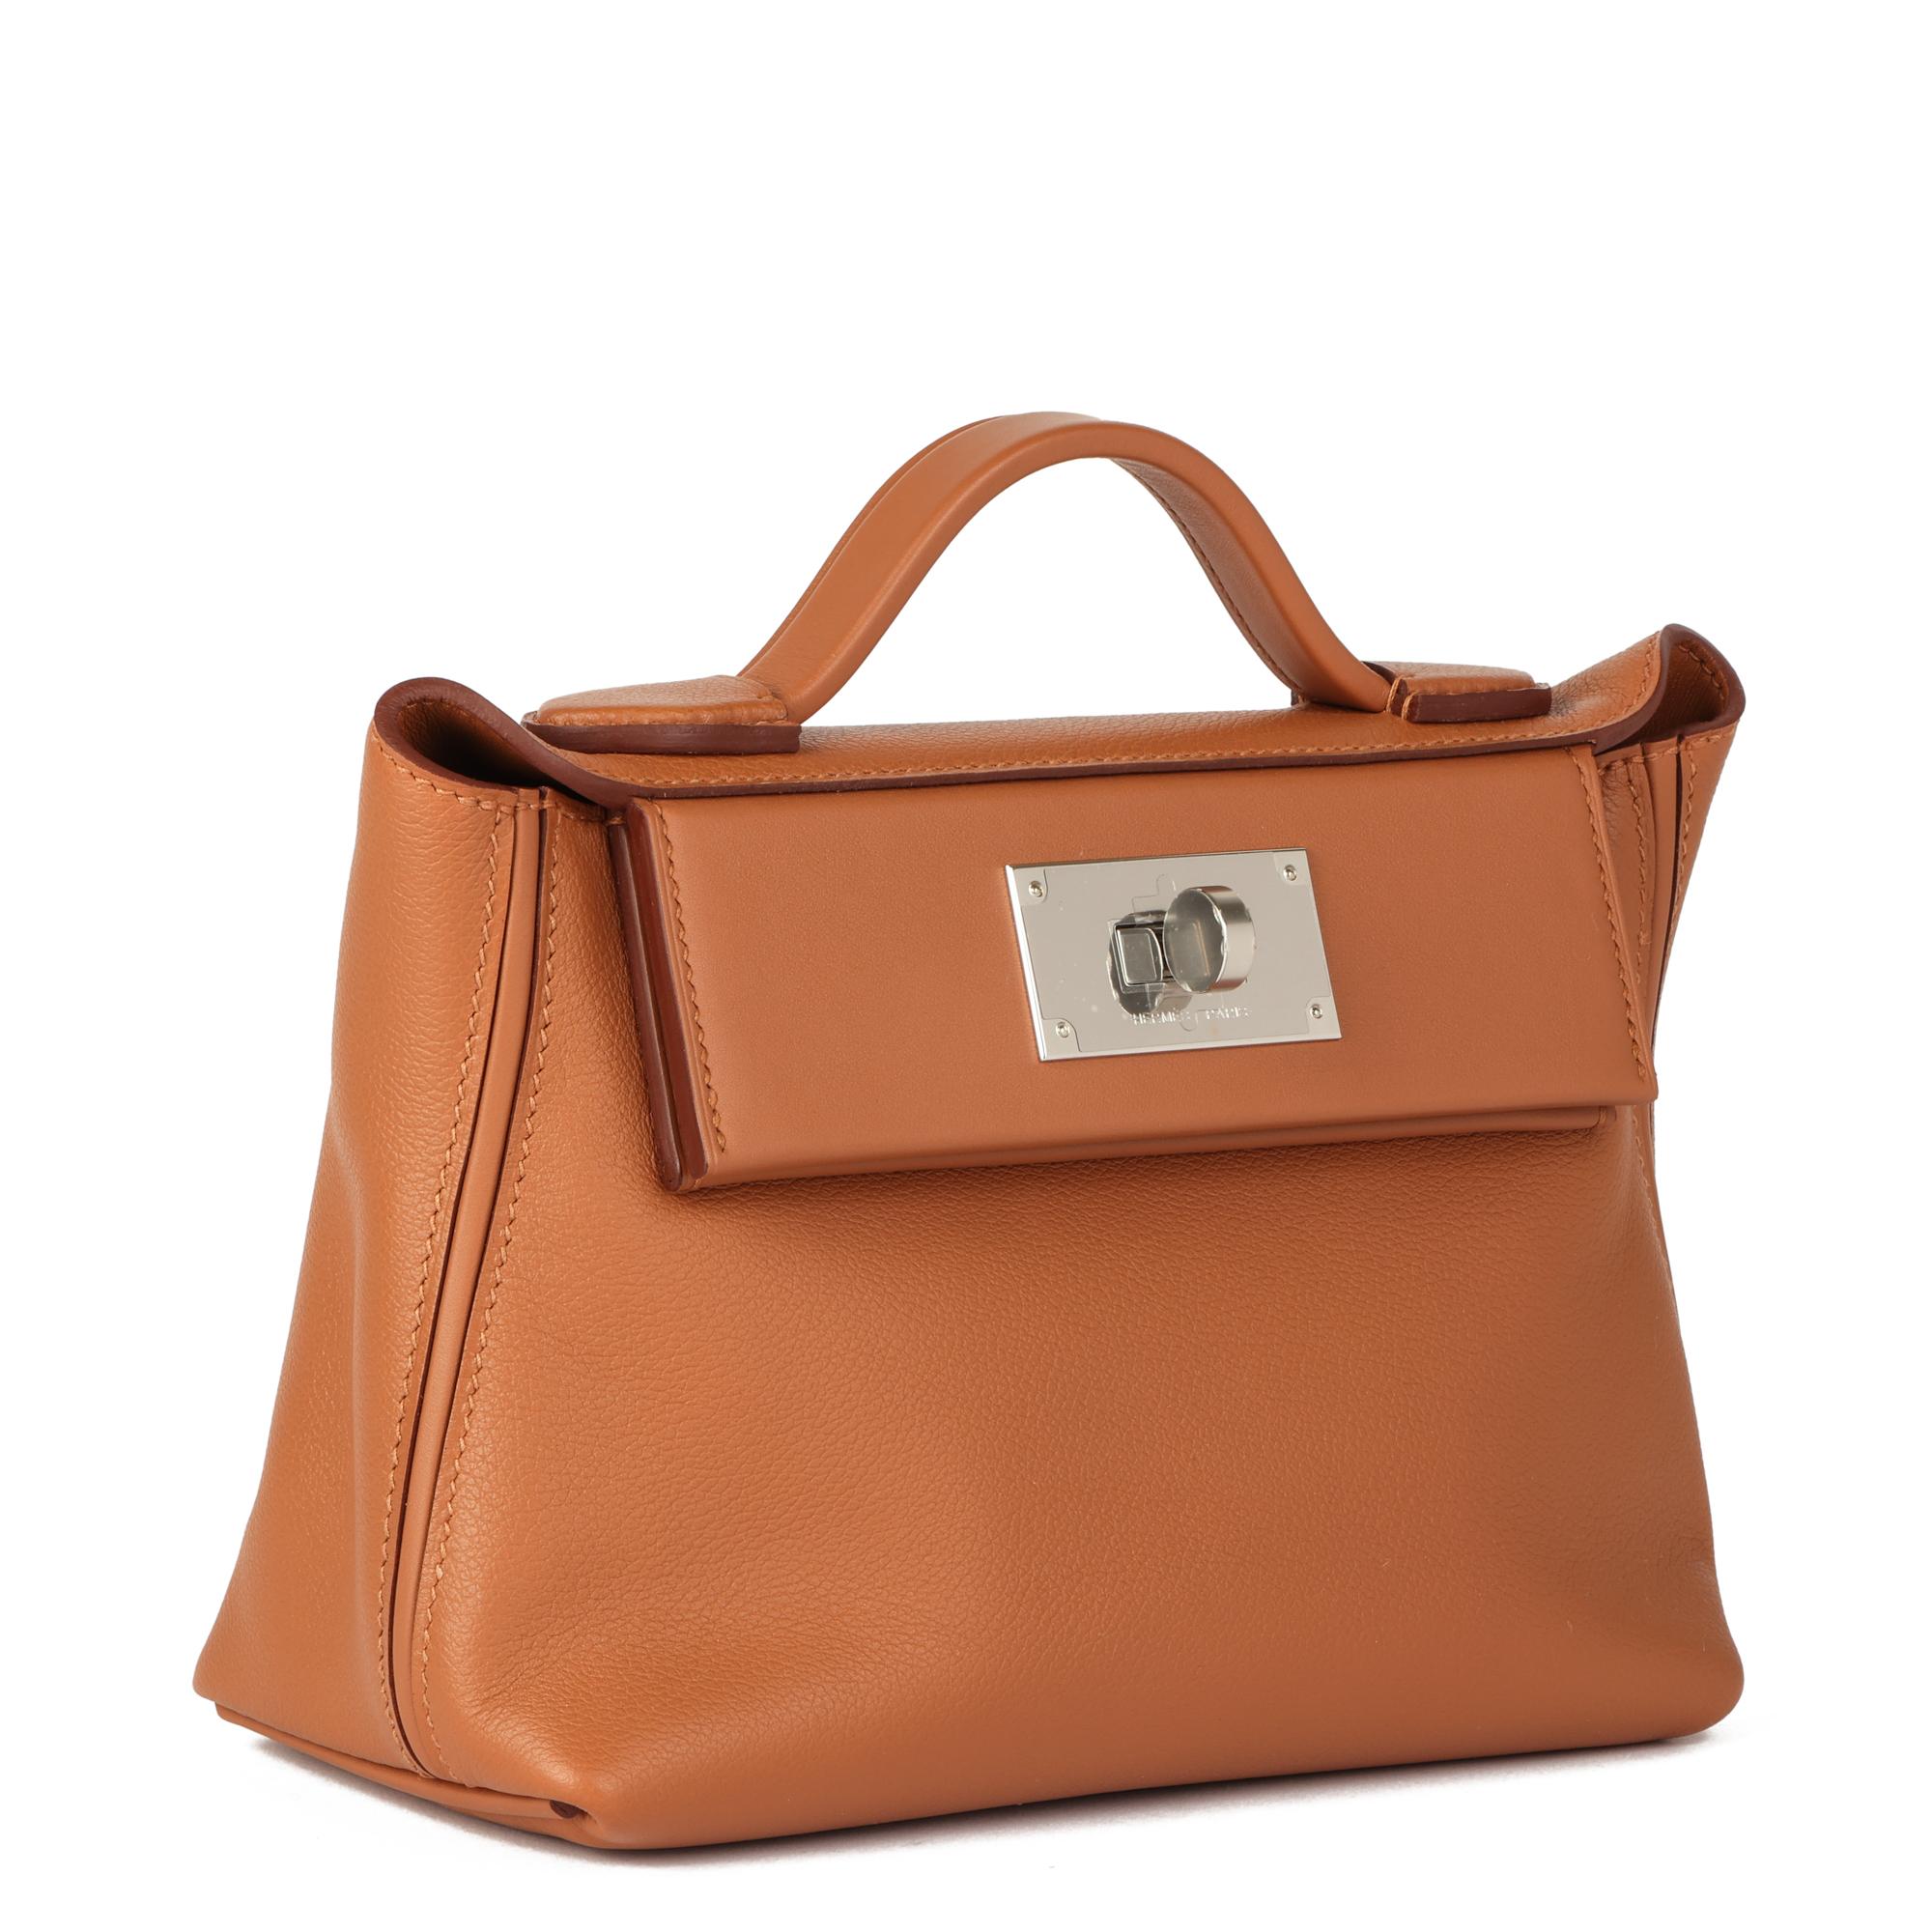 Hermès Gold Evercolour Leather & Swift Leather 24/24 21cm

CONDITION NOTES
This item is in unworn condition.

BRAND	Hermès
MODEL	24/24 21cm
AGE	2022
GENDER	Women's
MATERIAL(S)	Evercolour Leather, Swift Leather
COLOUR	Brown
BRAND